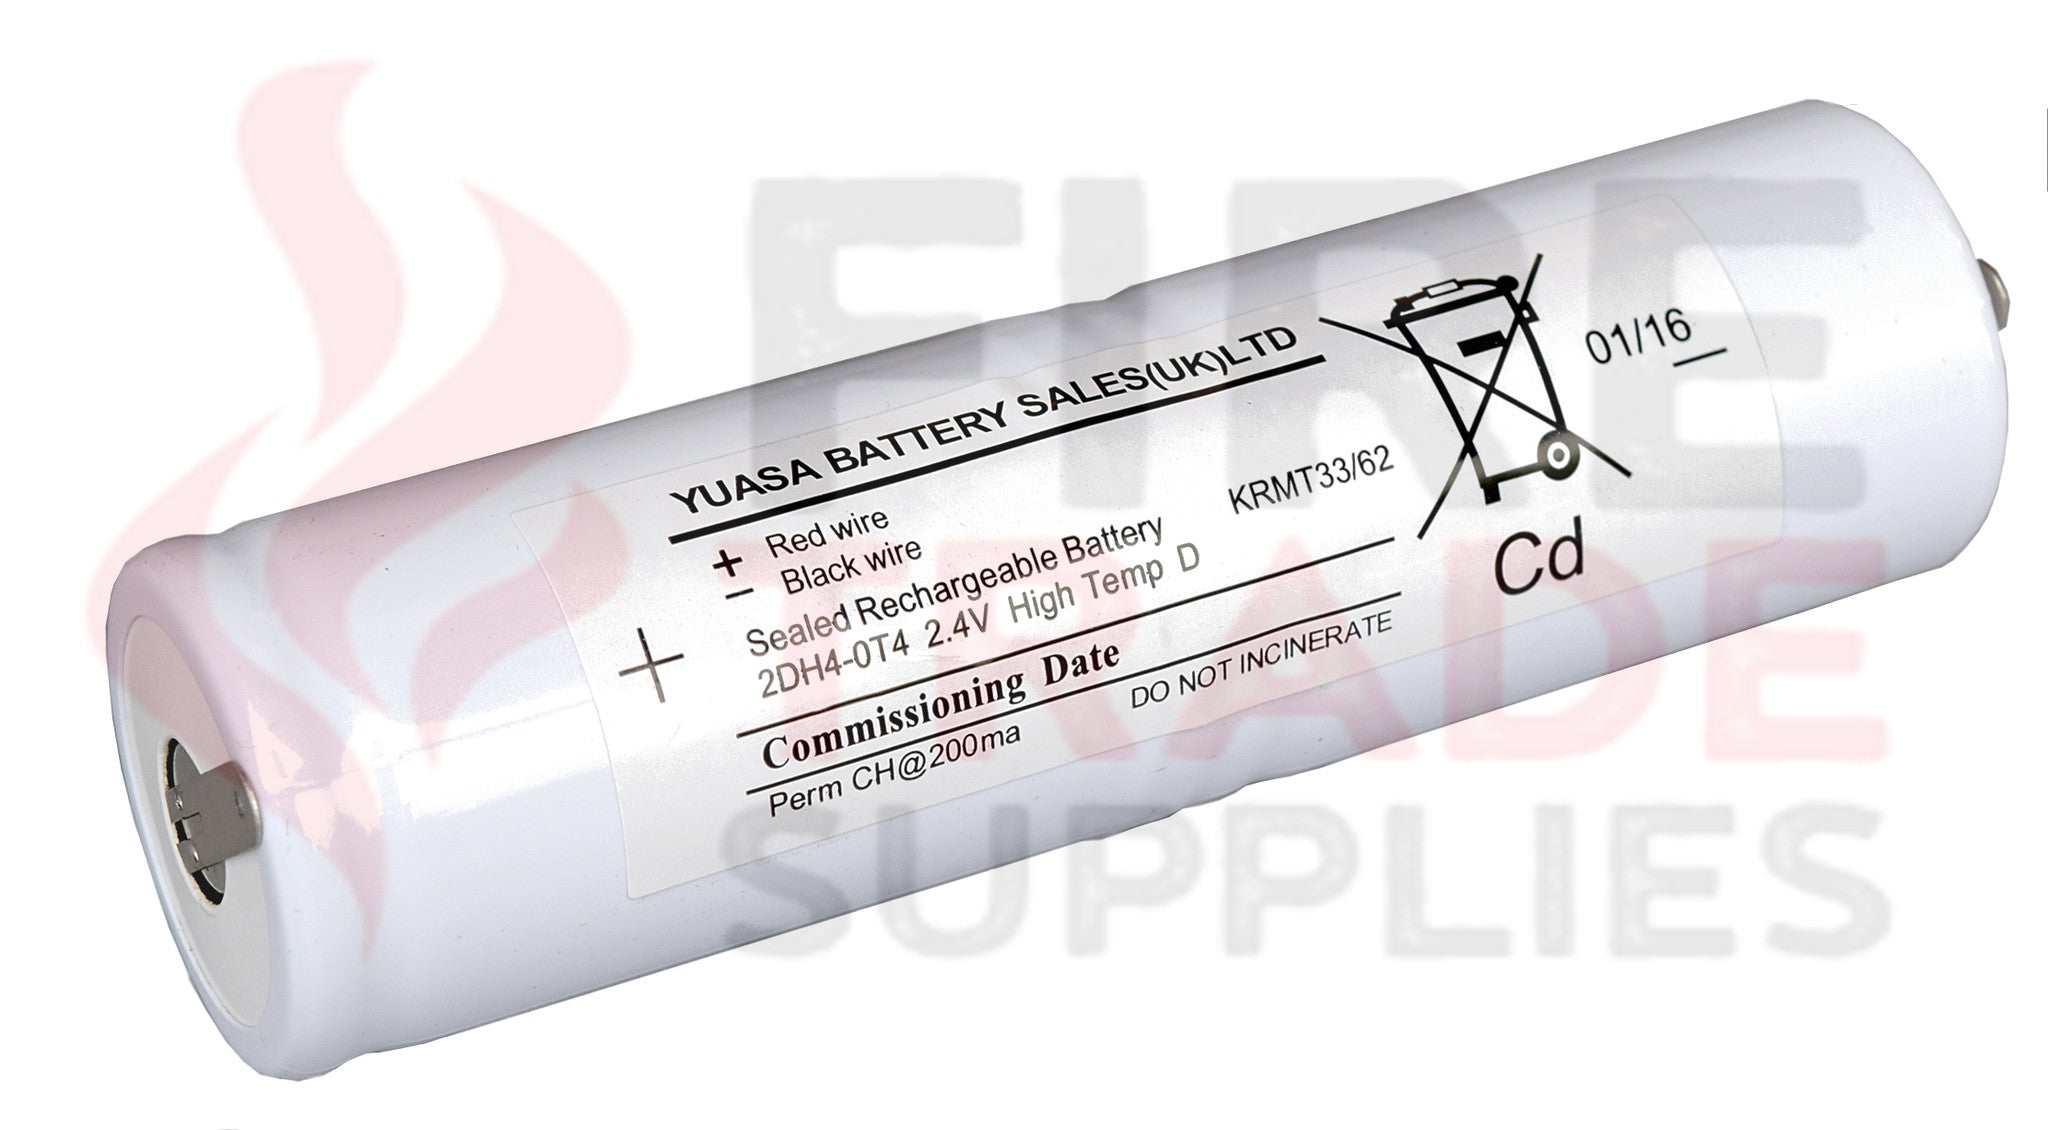 2DH4-OT4 2D Stick Cell 4ah 2.4v With Tags - Fire Trade Supplies